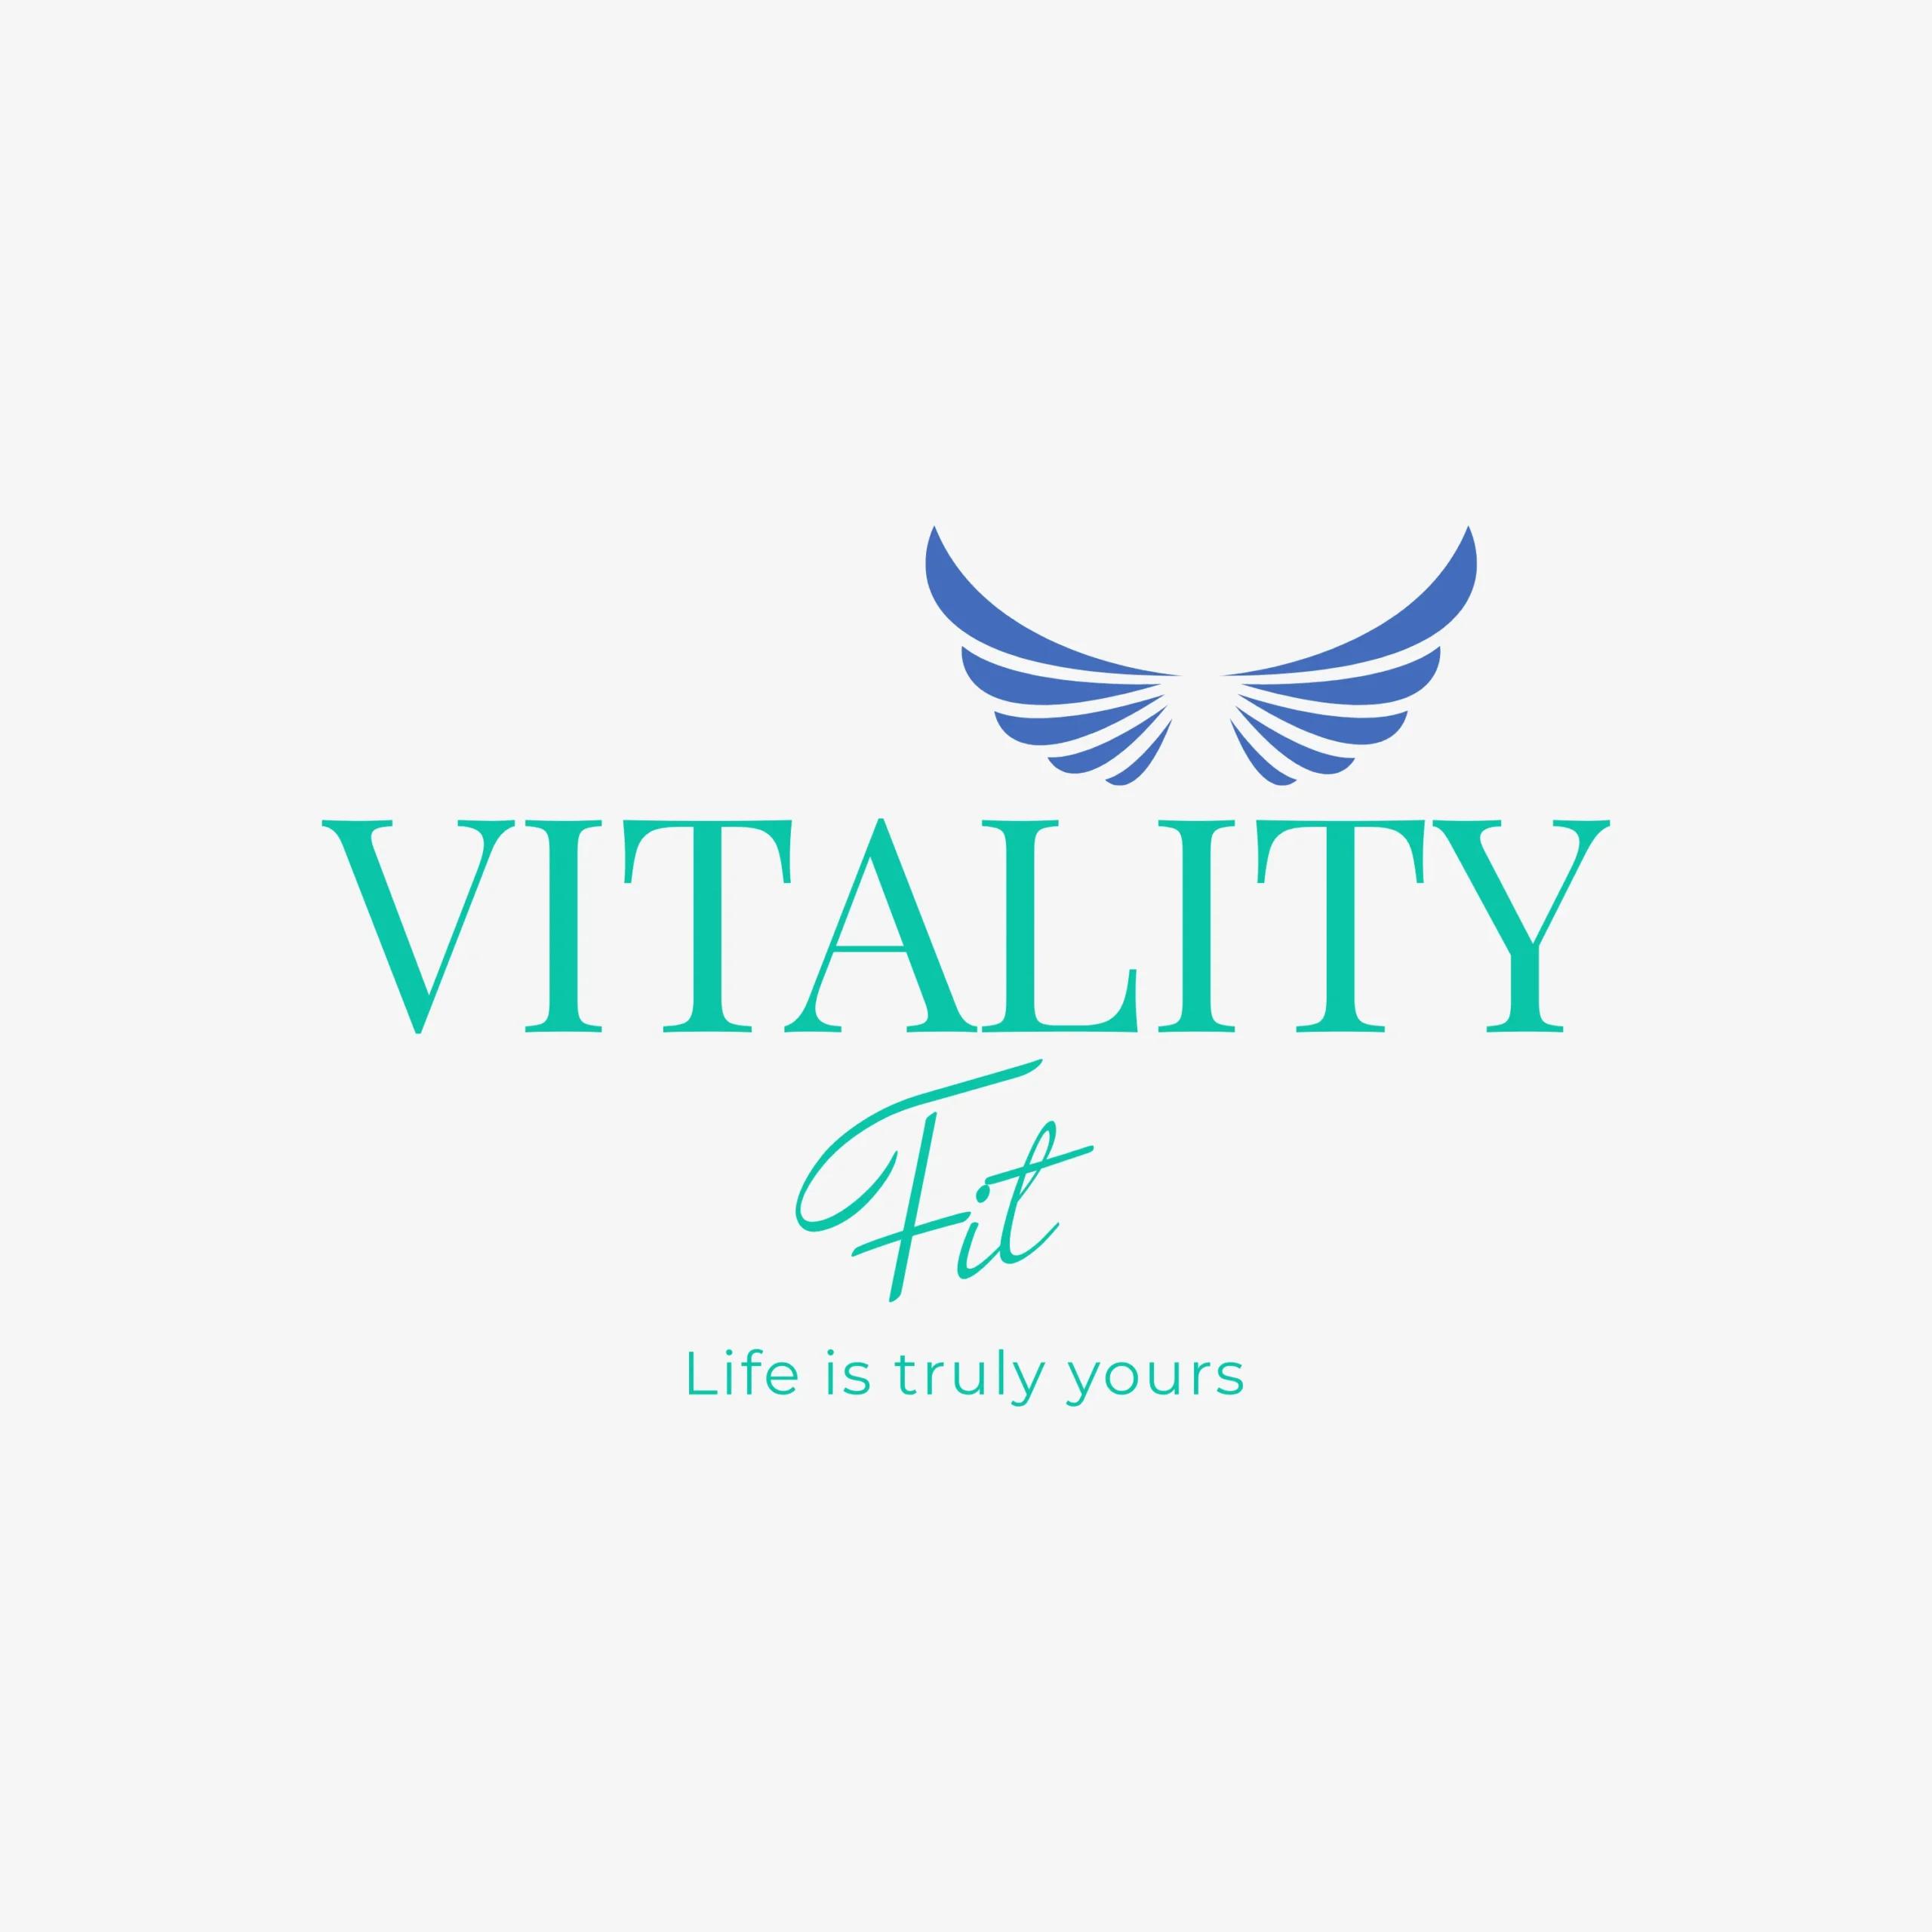 A logo image of 'Vitality Fit' which represents a life coach who supports cancer survivors